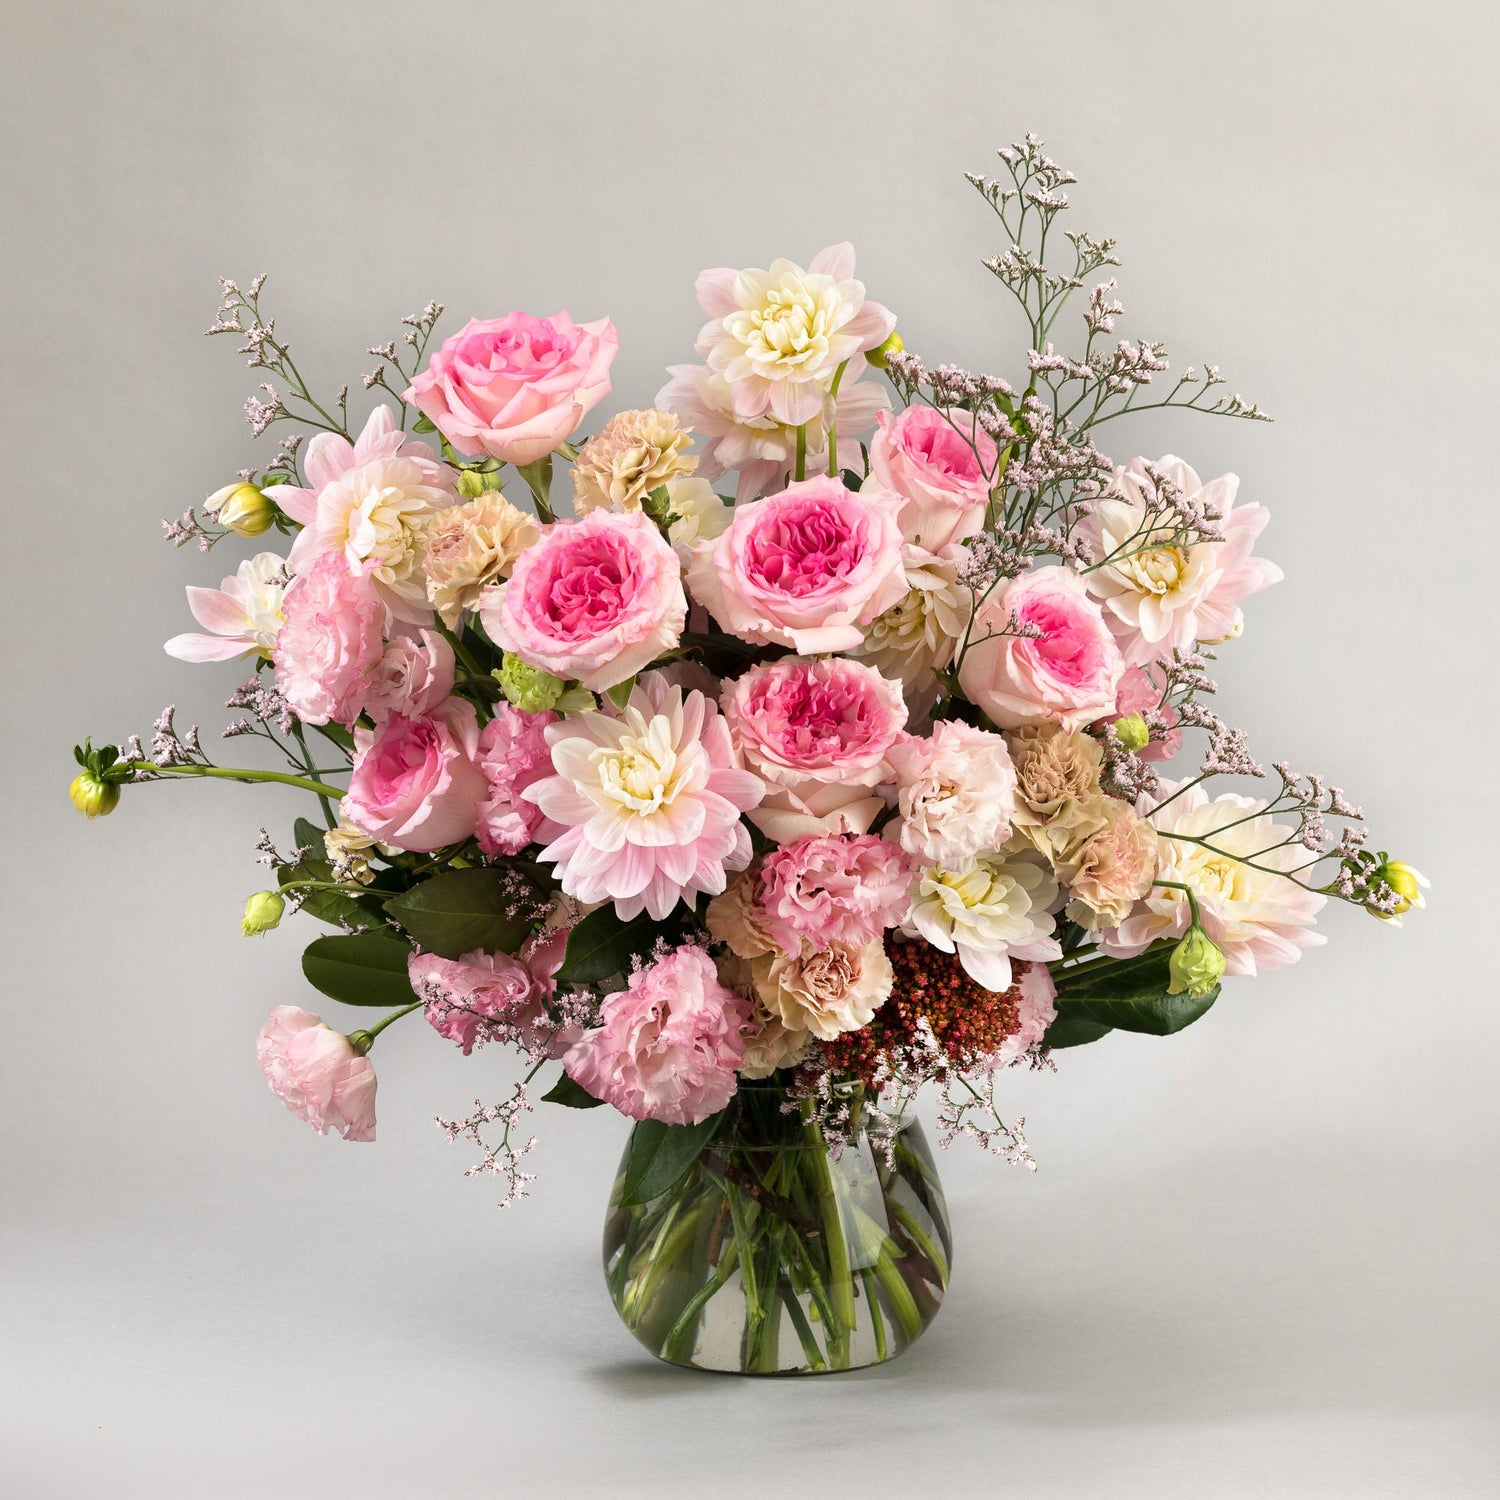 A glass vase filled with a mix of flowers in soft and bright pink. The flowers are roses, lisianthus and dahlias.